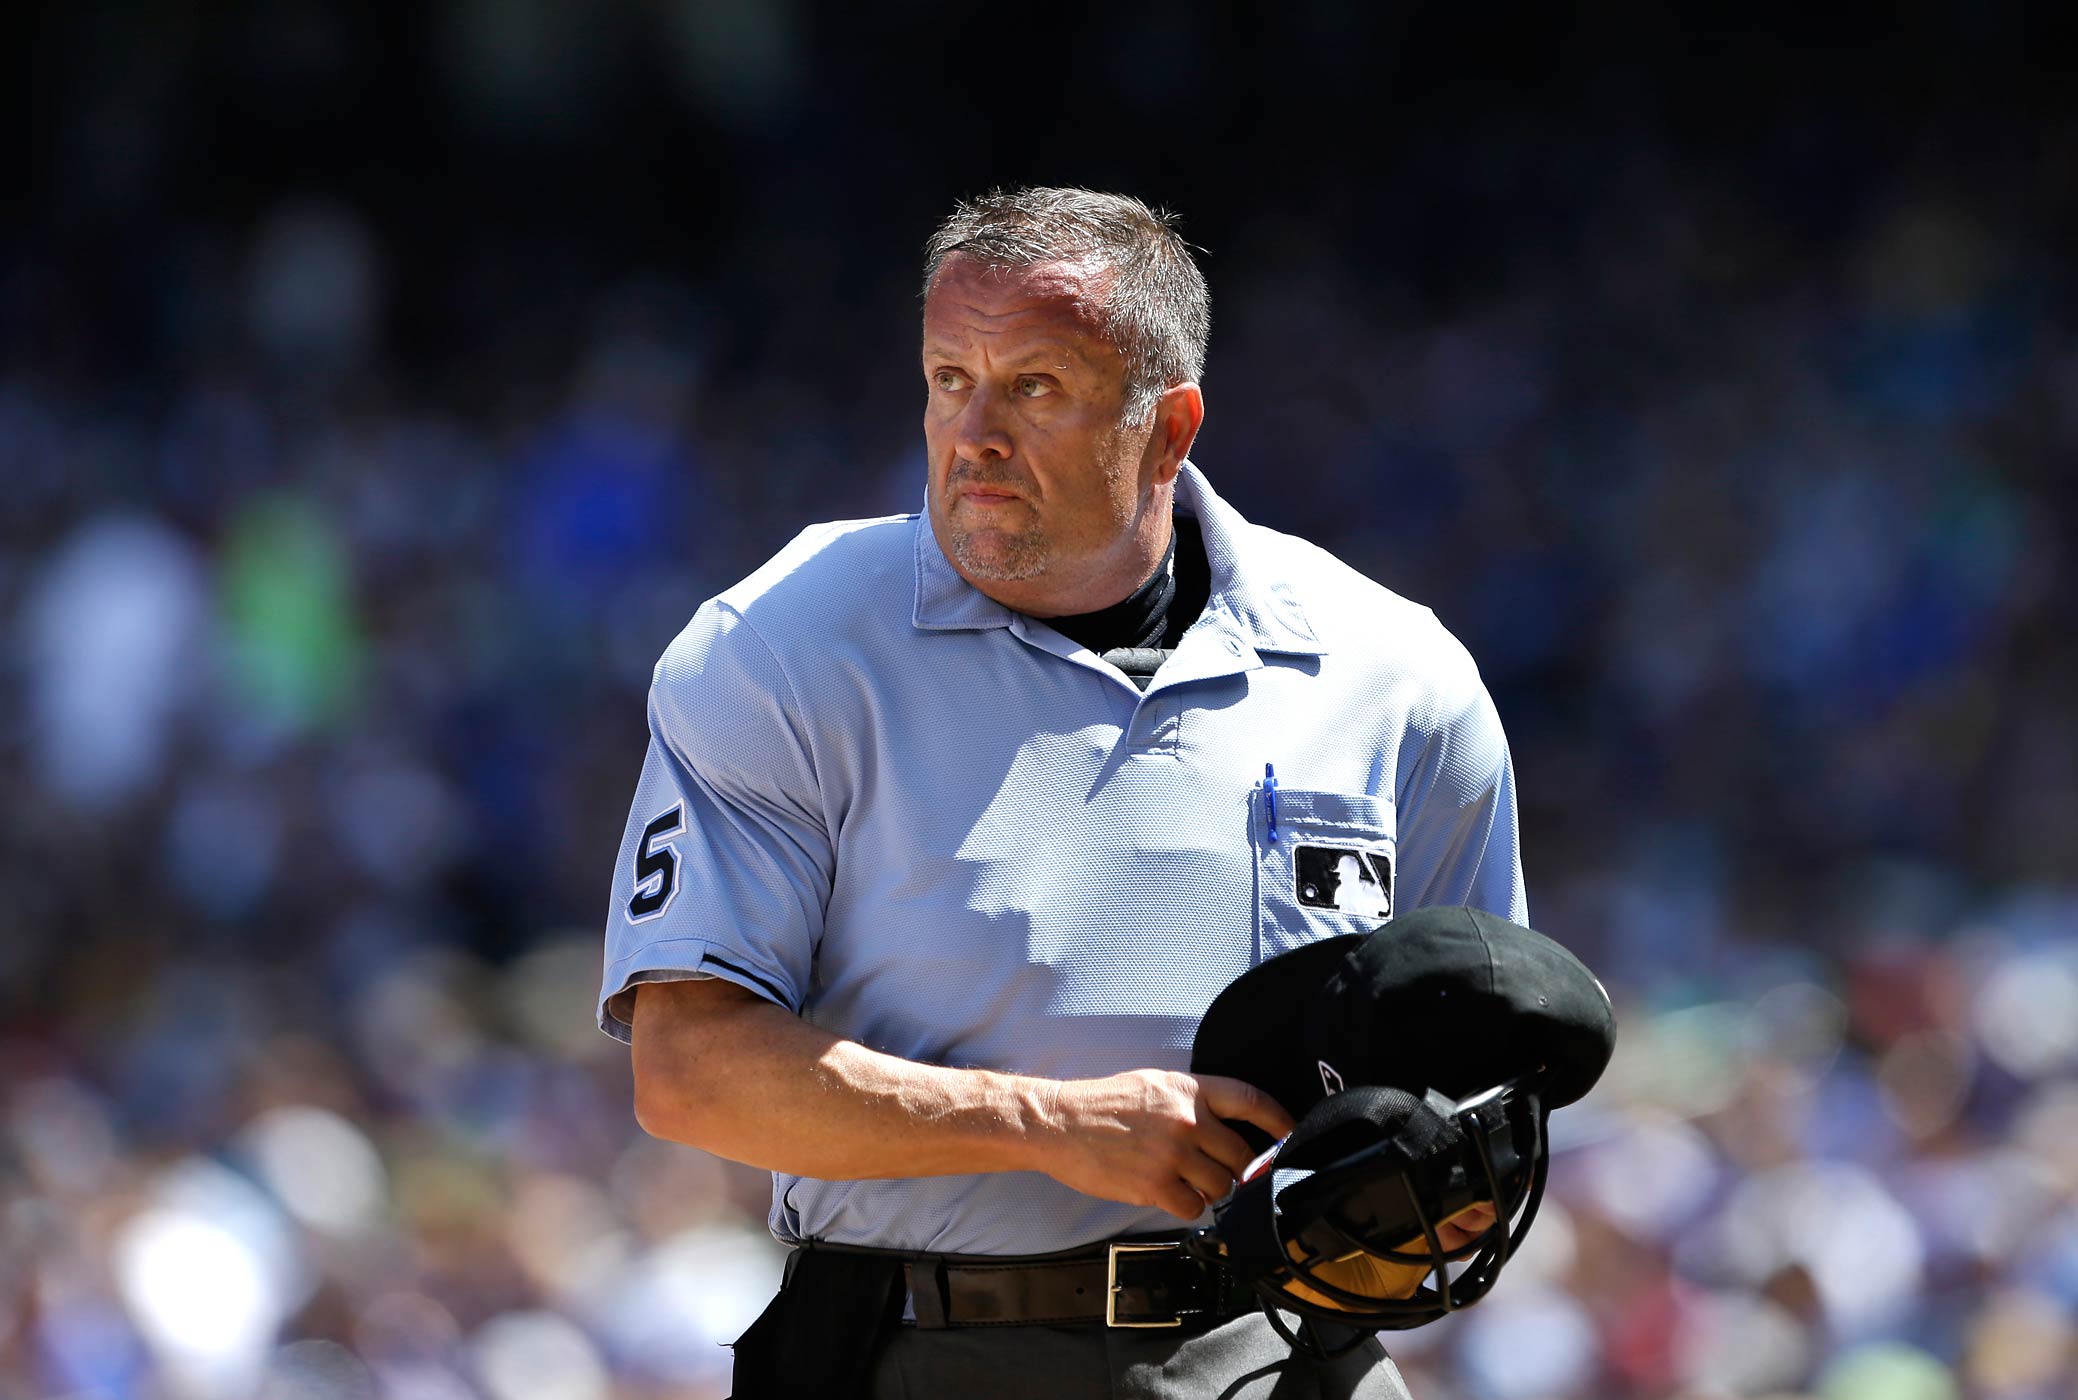 Umpire Dale Scott officiates a game between the Mariners and Toronto Blue Jays on Aug. 7, 2013, in Seattle, Wa. (Elaine Thompson—AP)